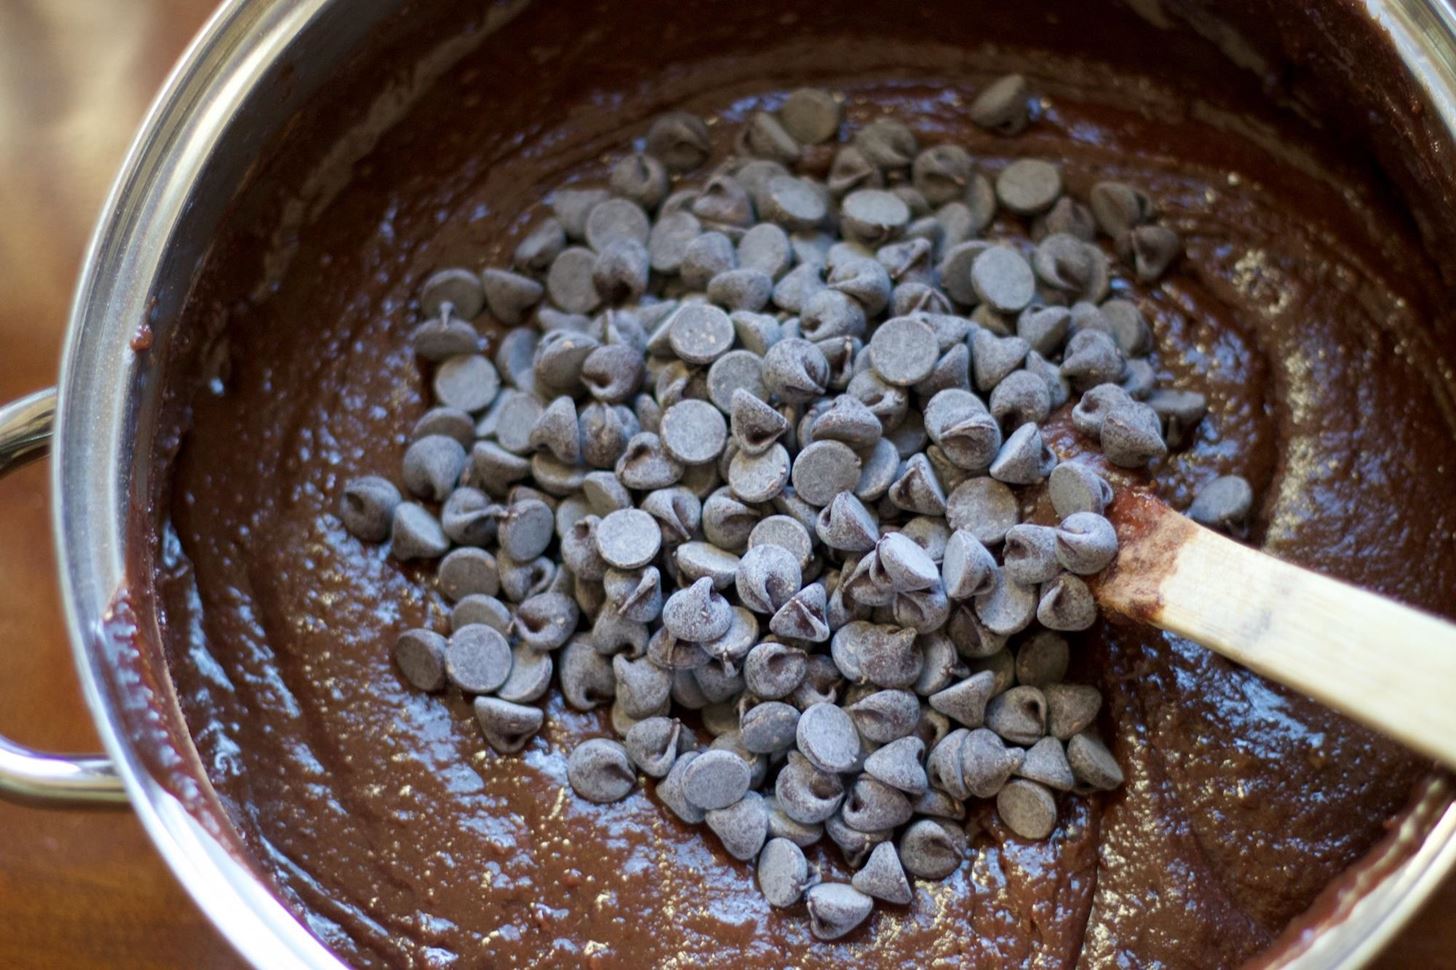 Take Your Brownies to the Next Level with Add-Ins & Toppings